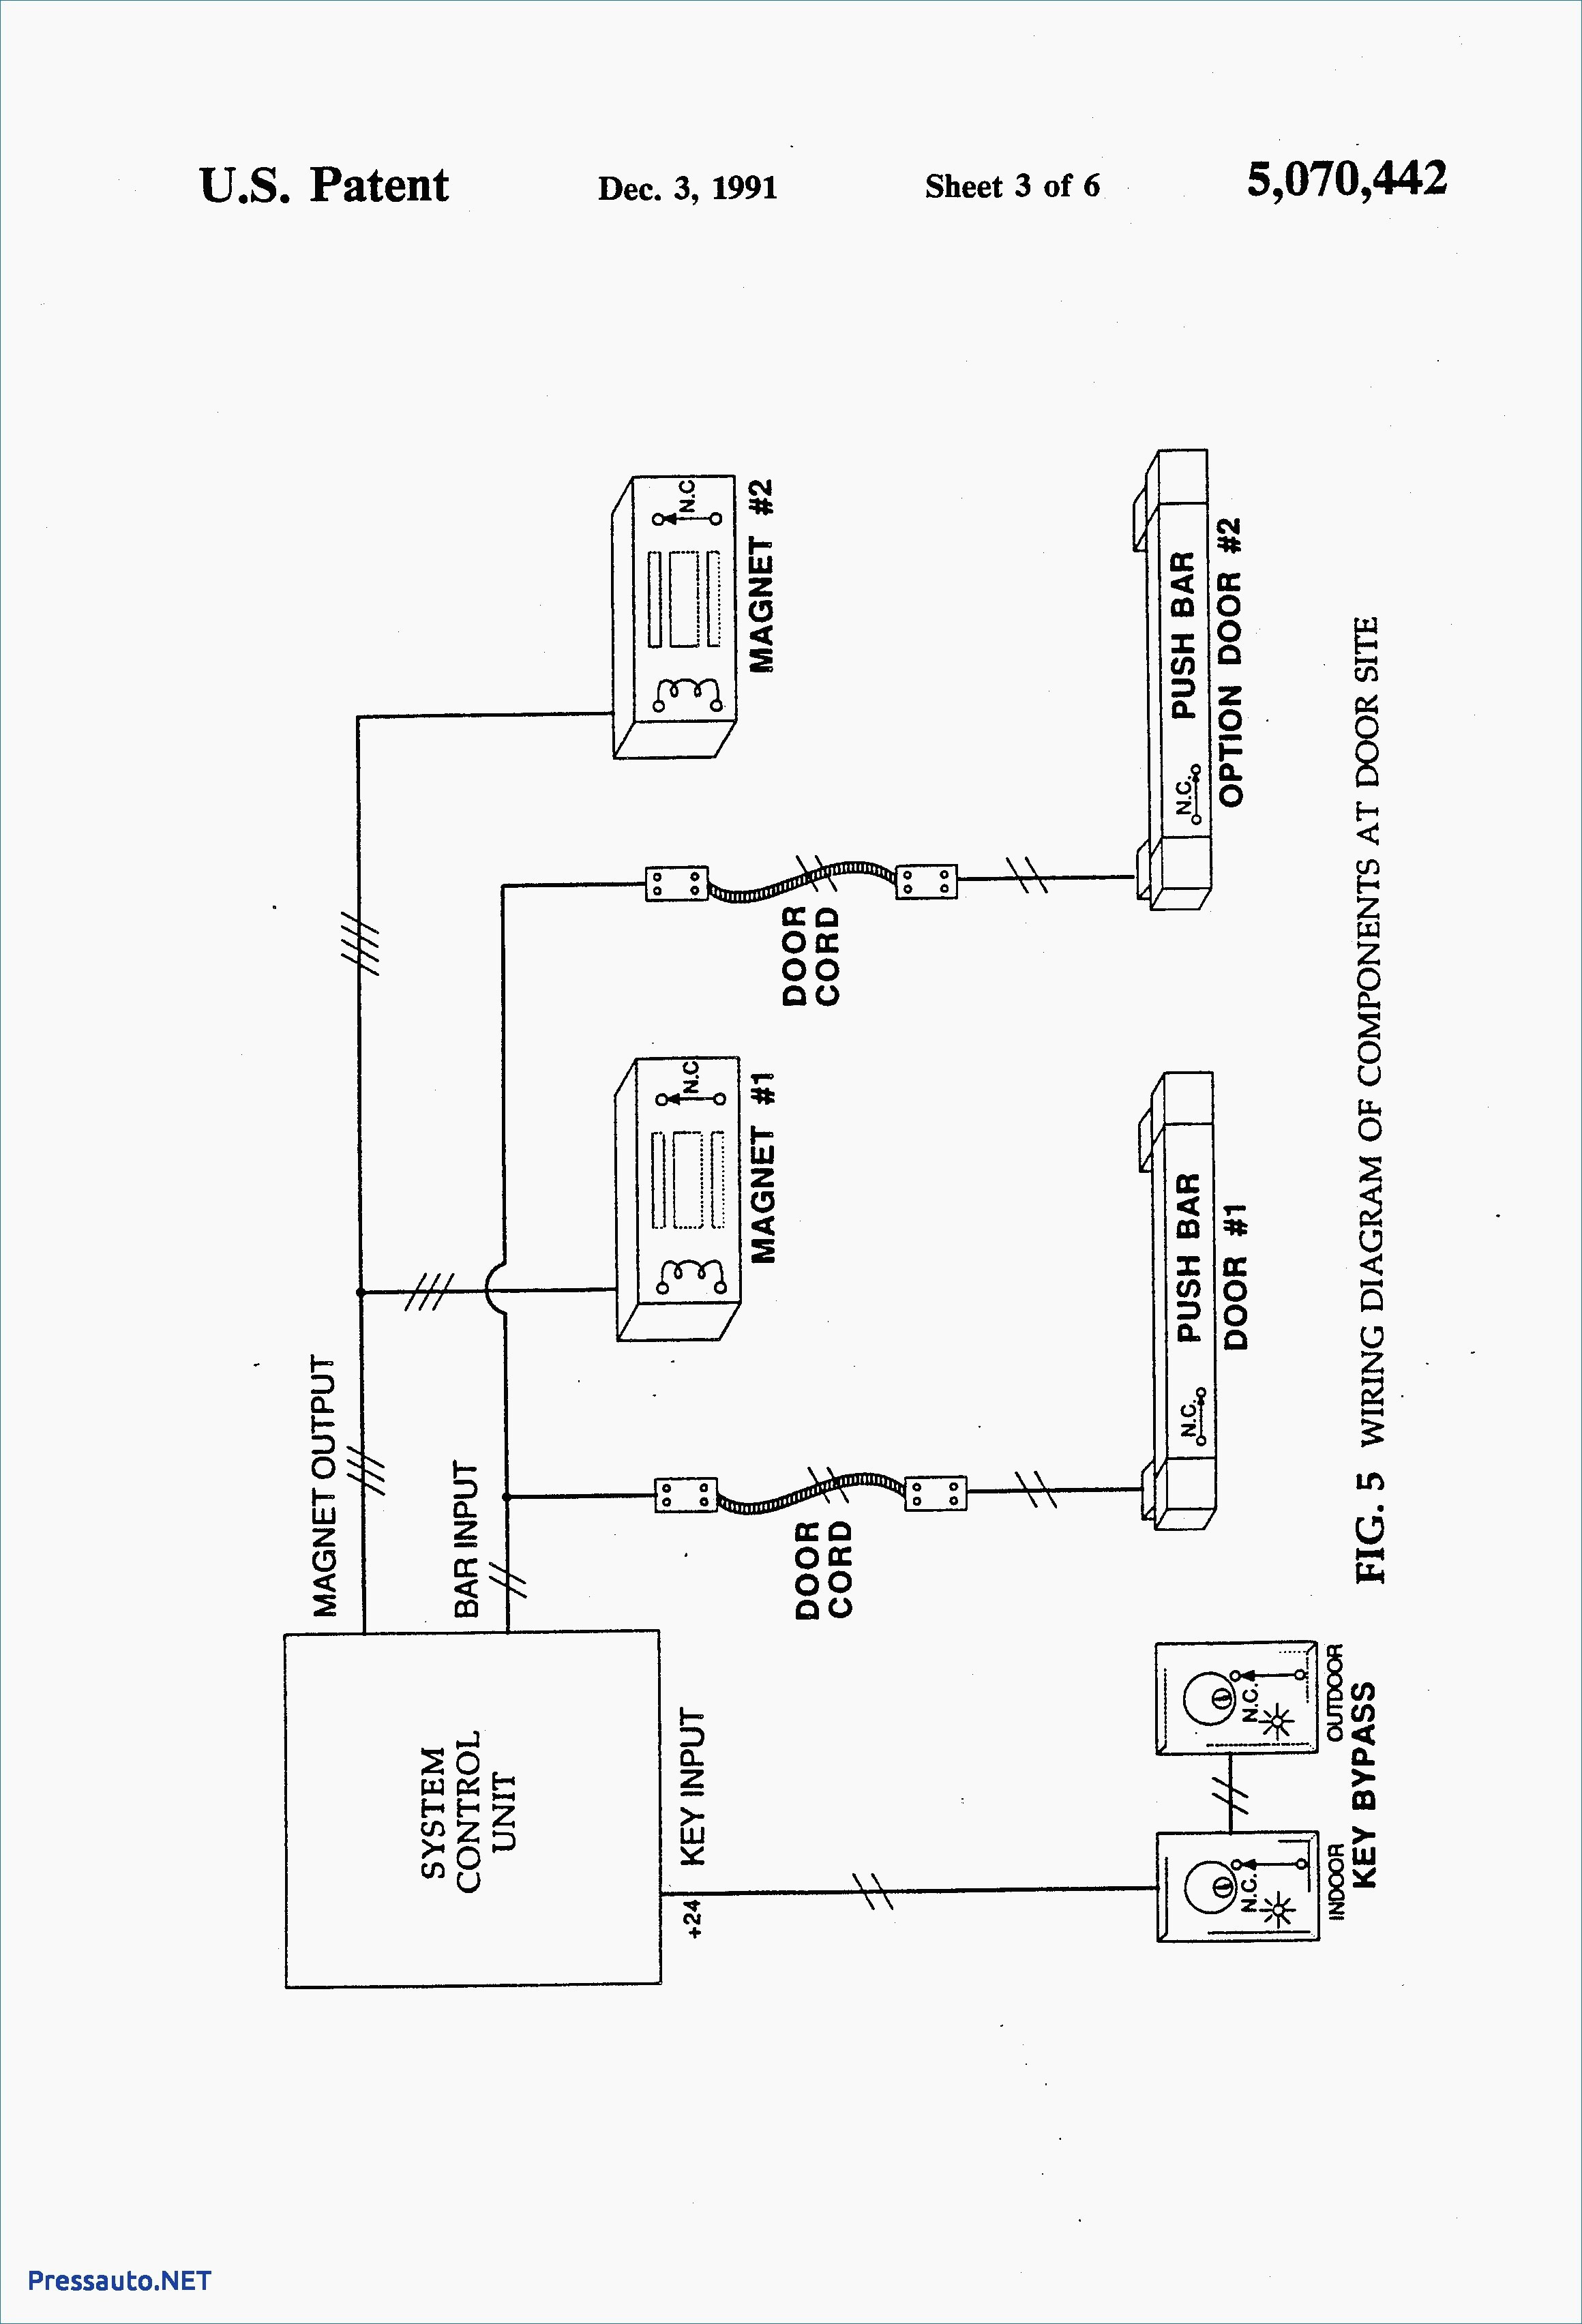 Light Switch Outlet Combo Wiring Diagram New Wiring Diagram Switch - Light Switch Outlet Combo Wiring Diagram